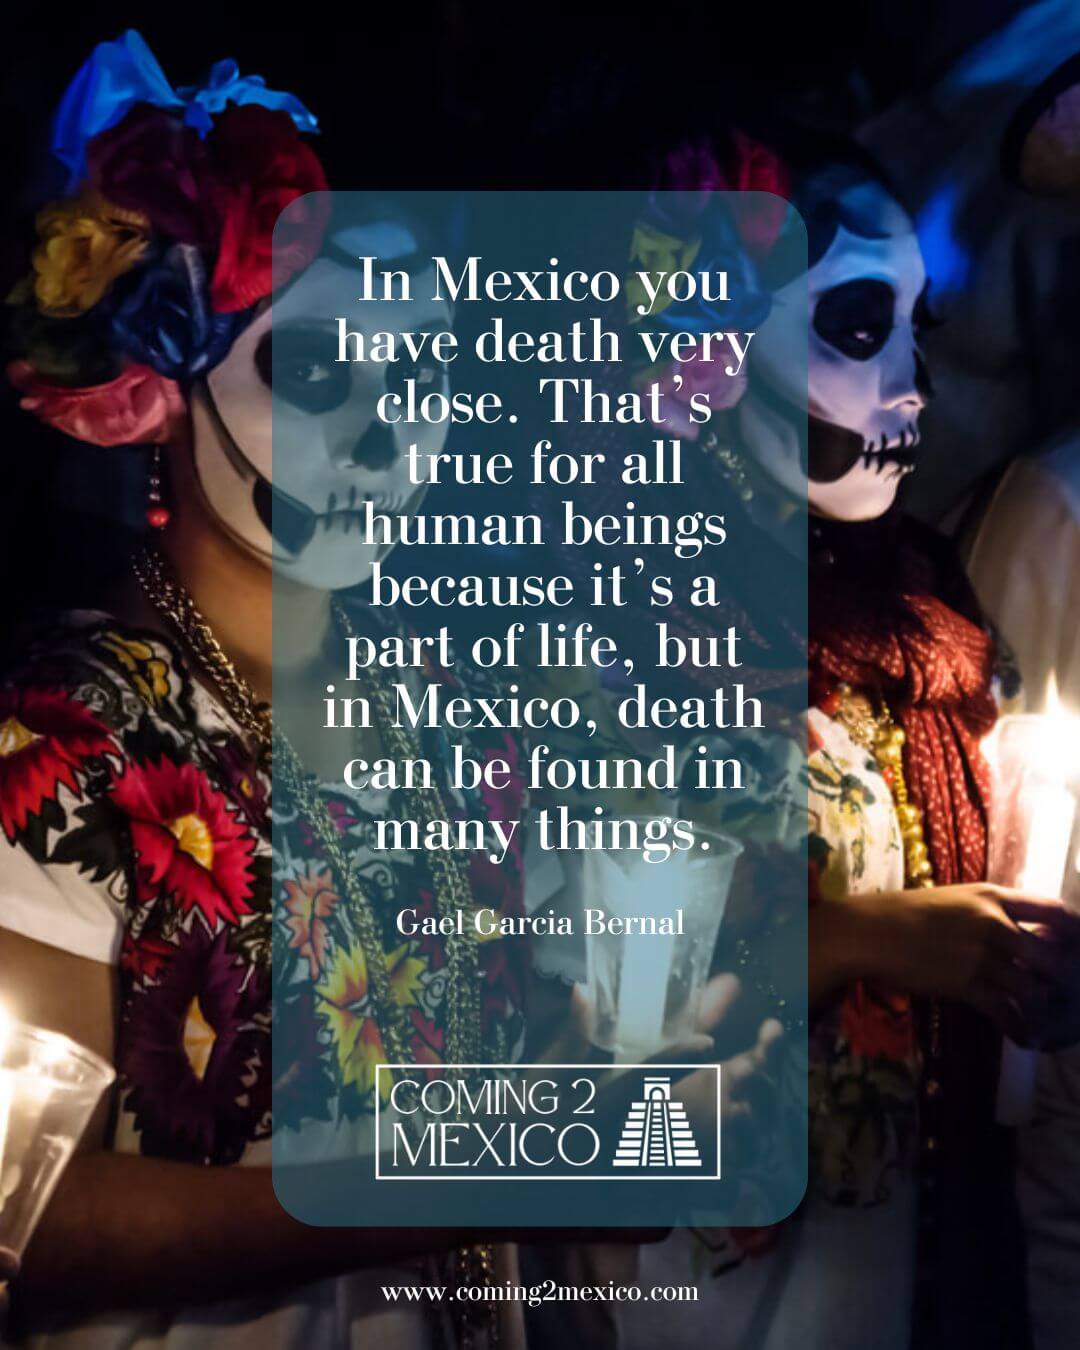 “In Mexico you have death very close. That’s true for all human beings because it’s a part of life, but in Mexico, death can be found in many things.” - Gael Garcia Bernal